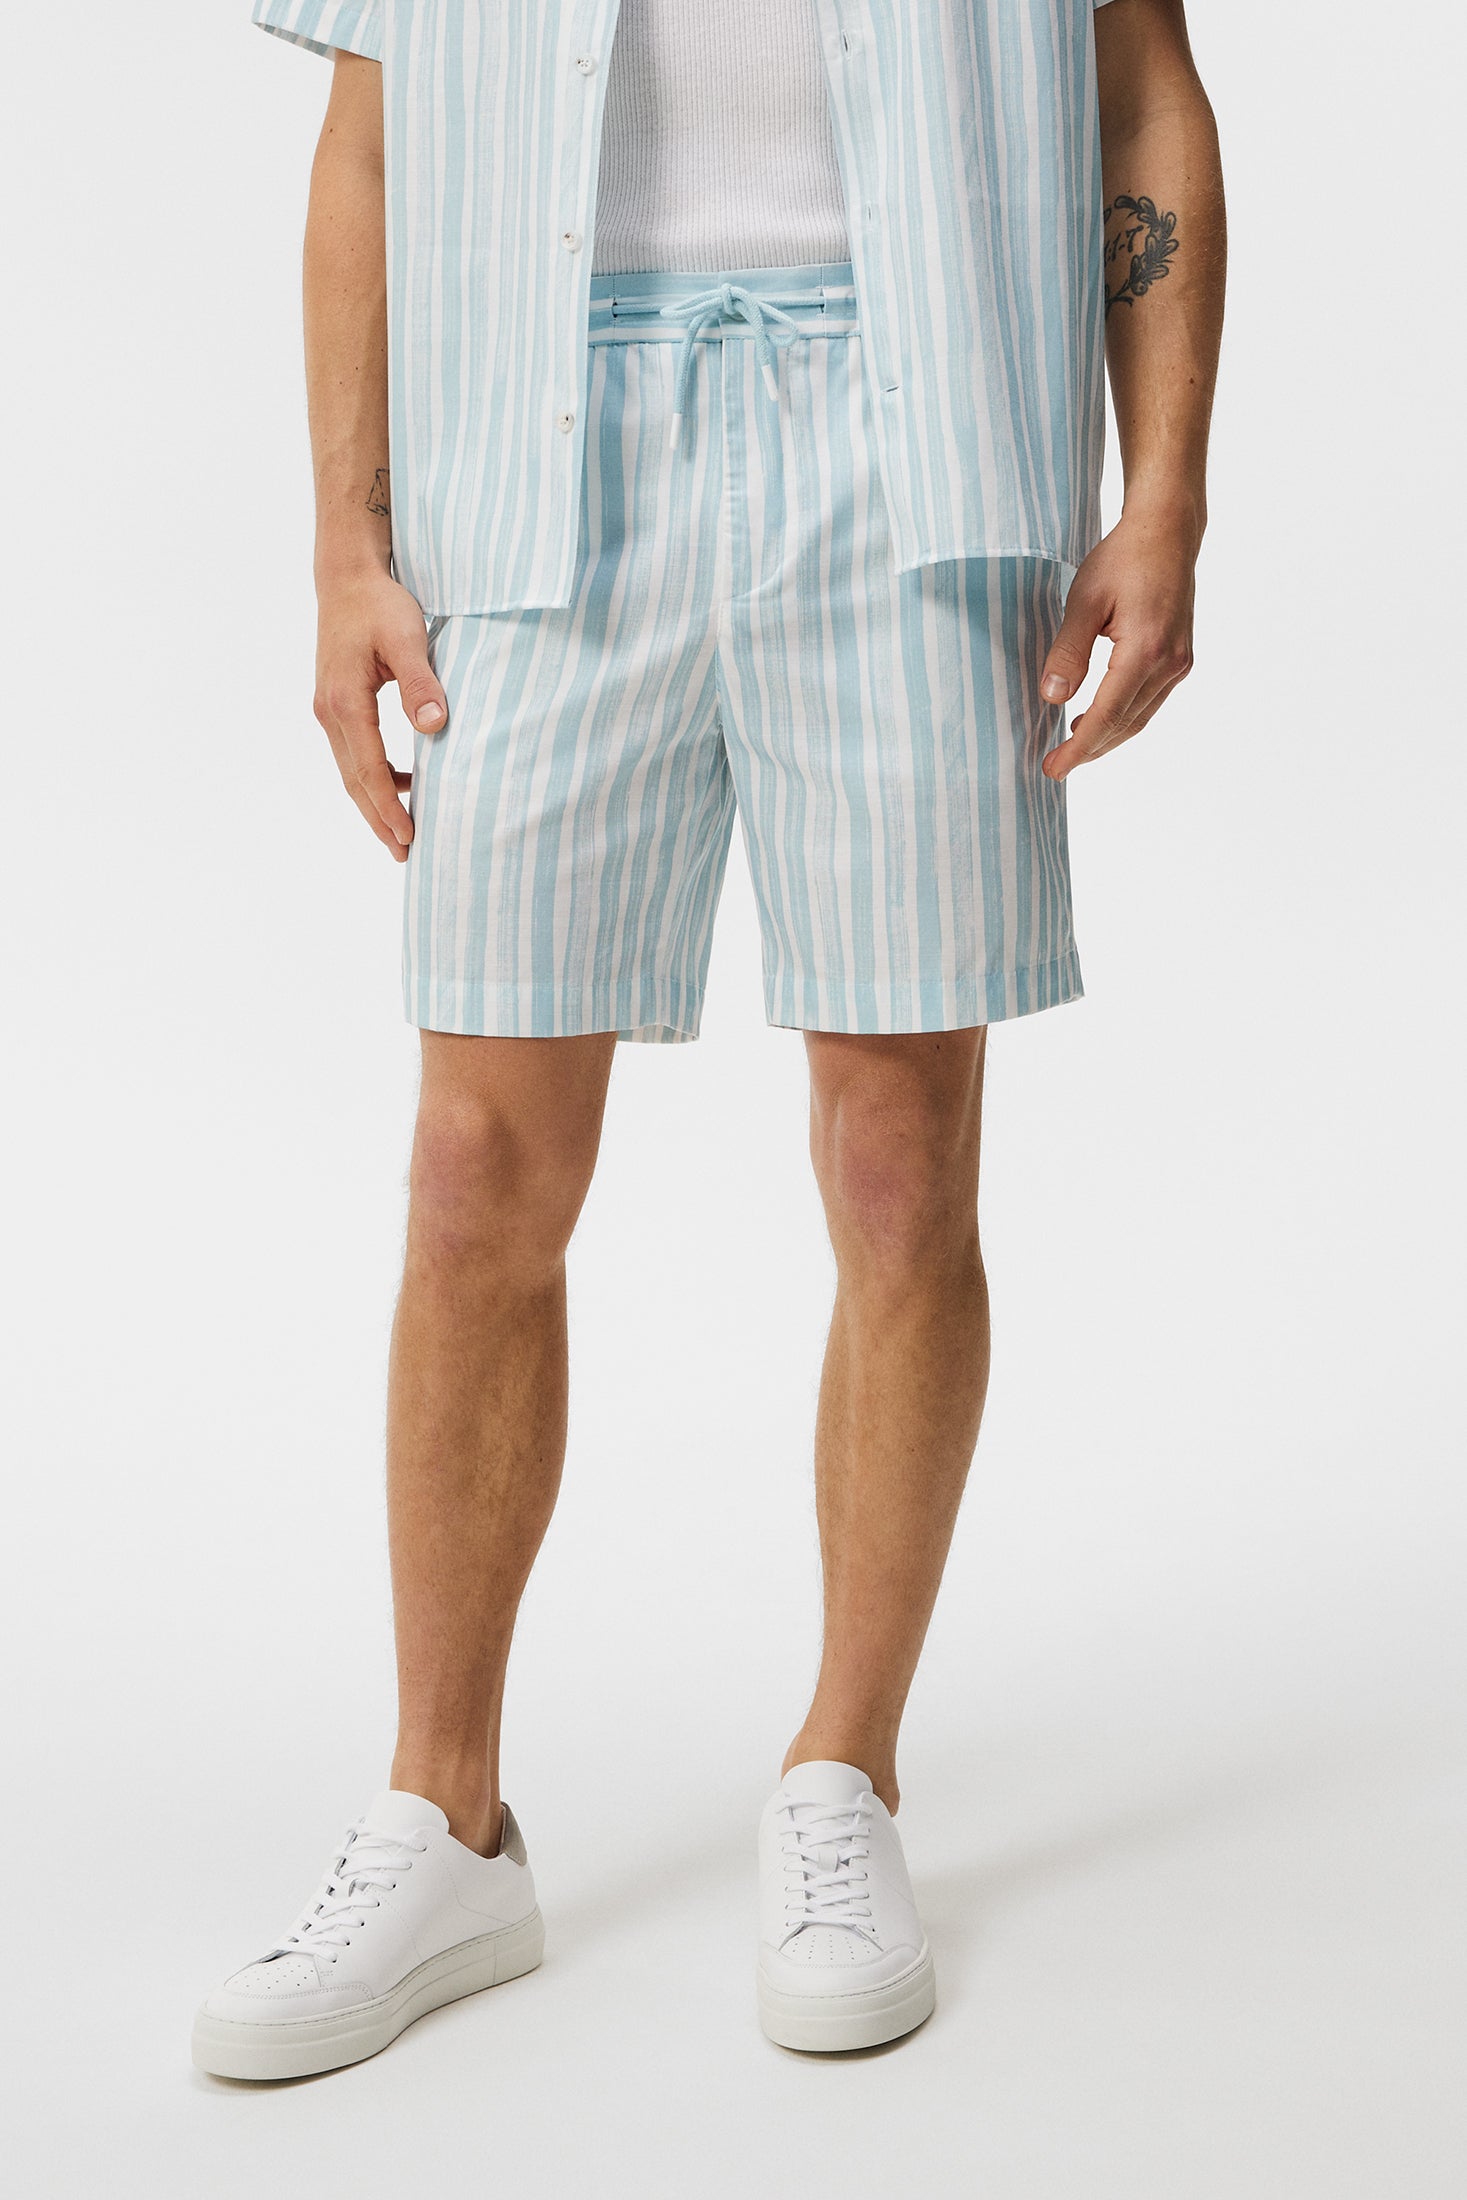 Earl Painted Stripe Shorts